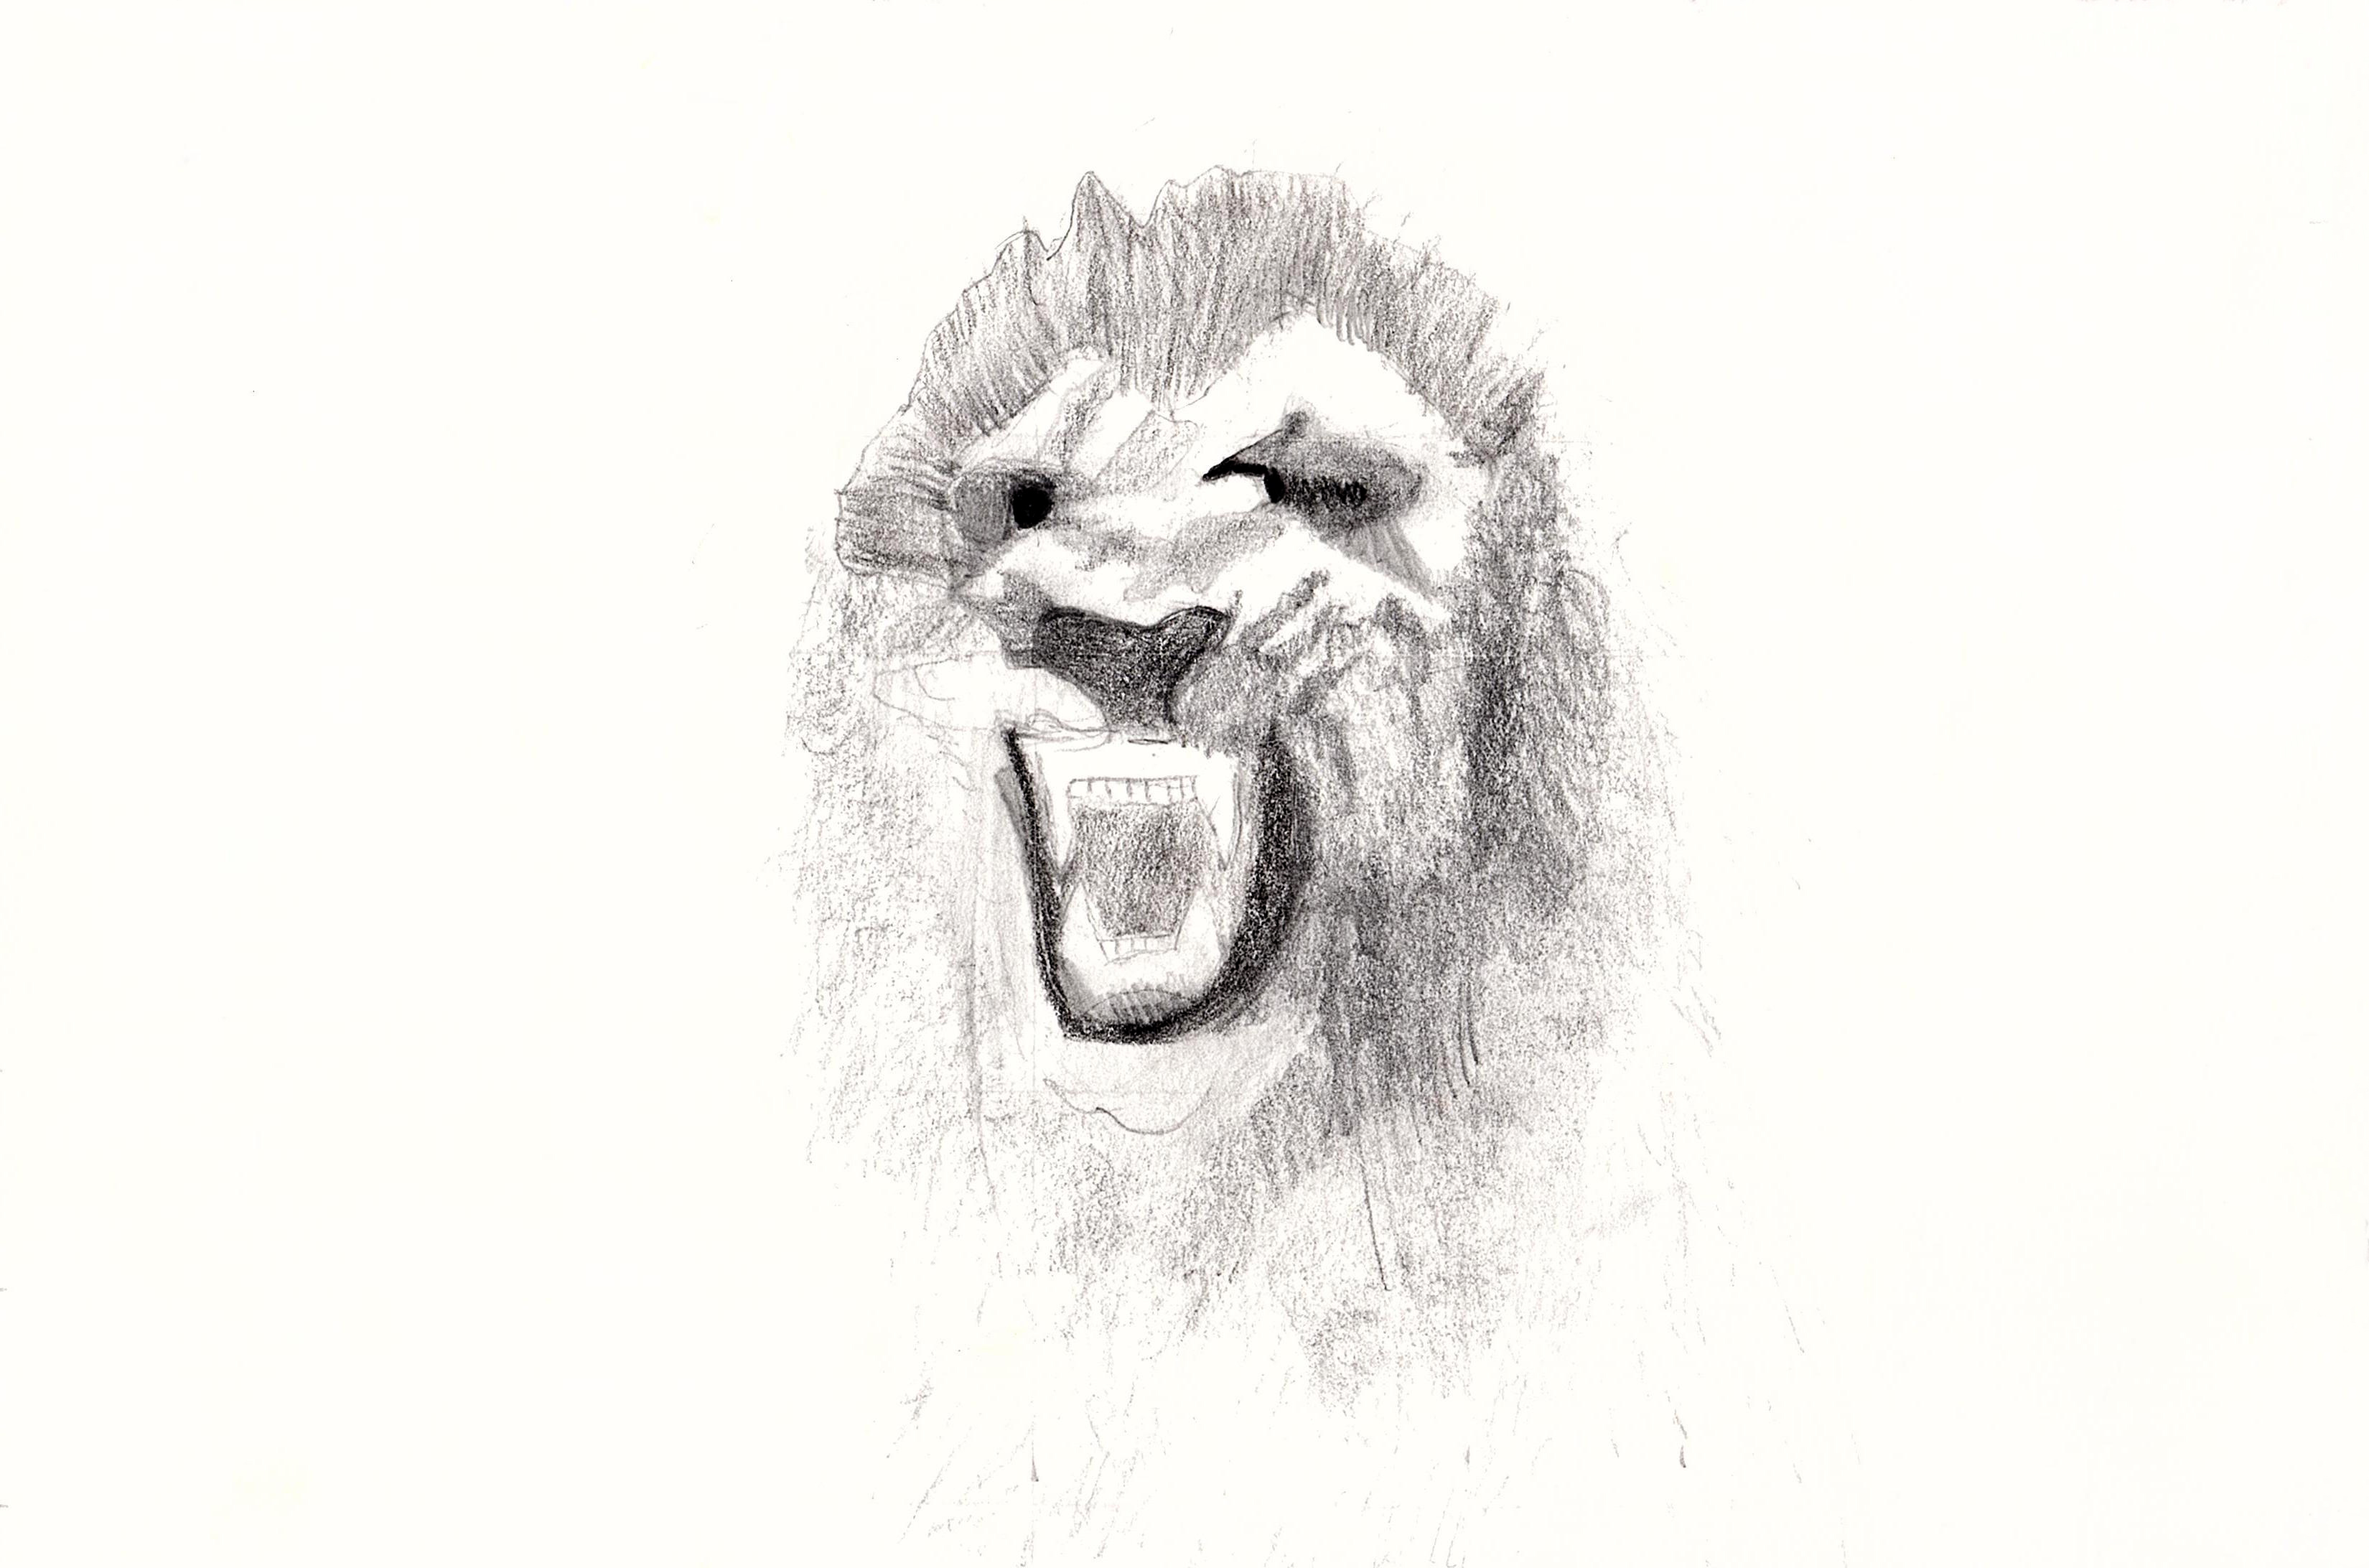 Untitled (Lion) by Erica, age 16